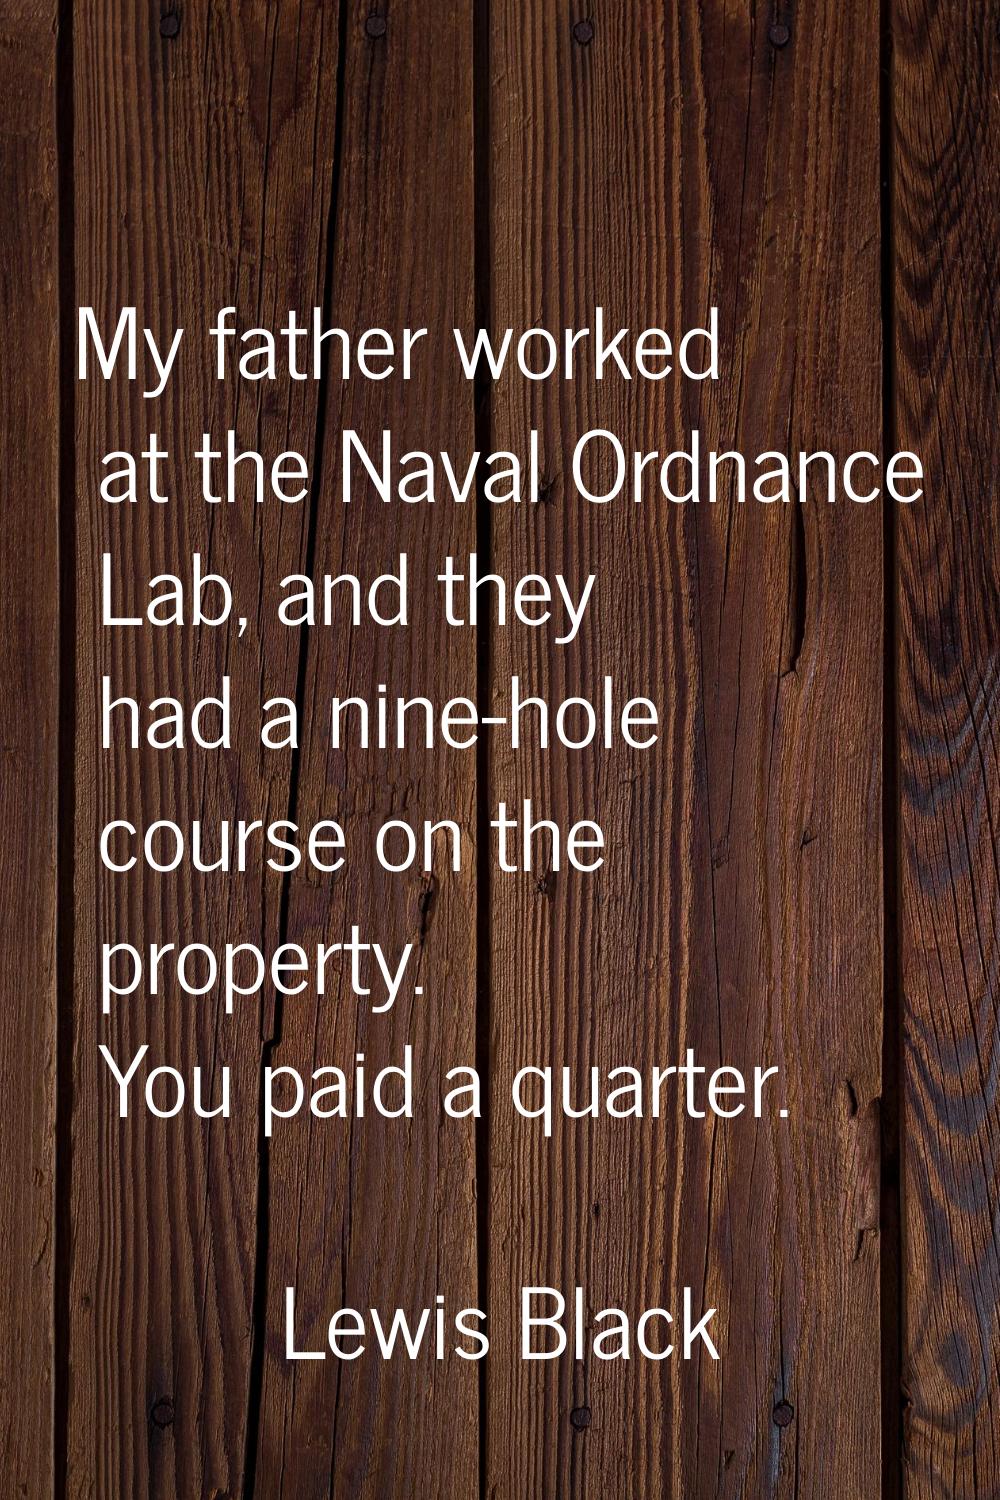 My father worked at the Naval Ordnance Lab, and they had a nine-hole course on the property. You pa